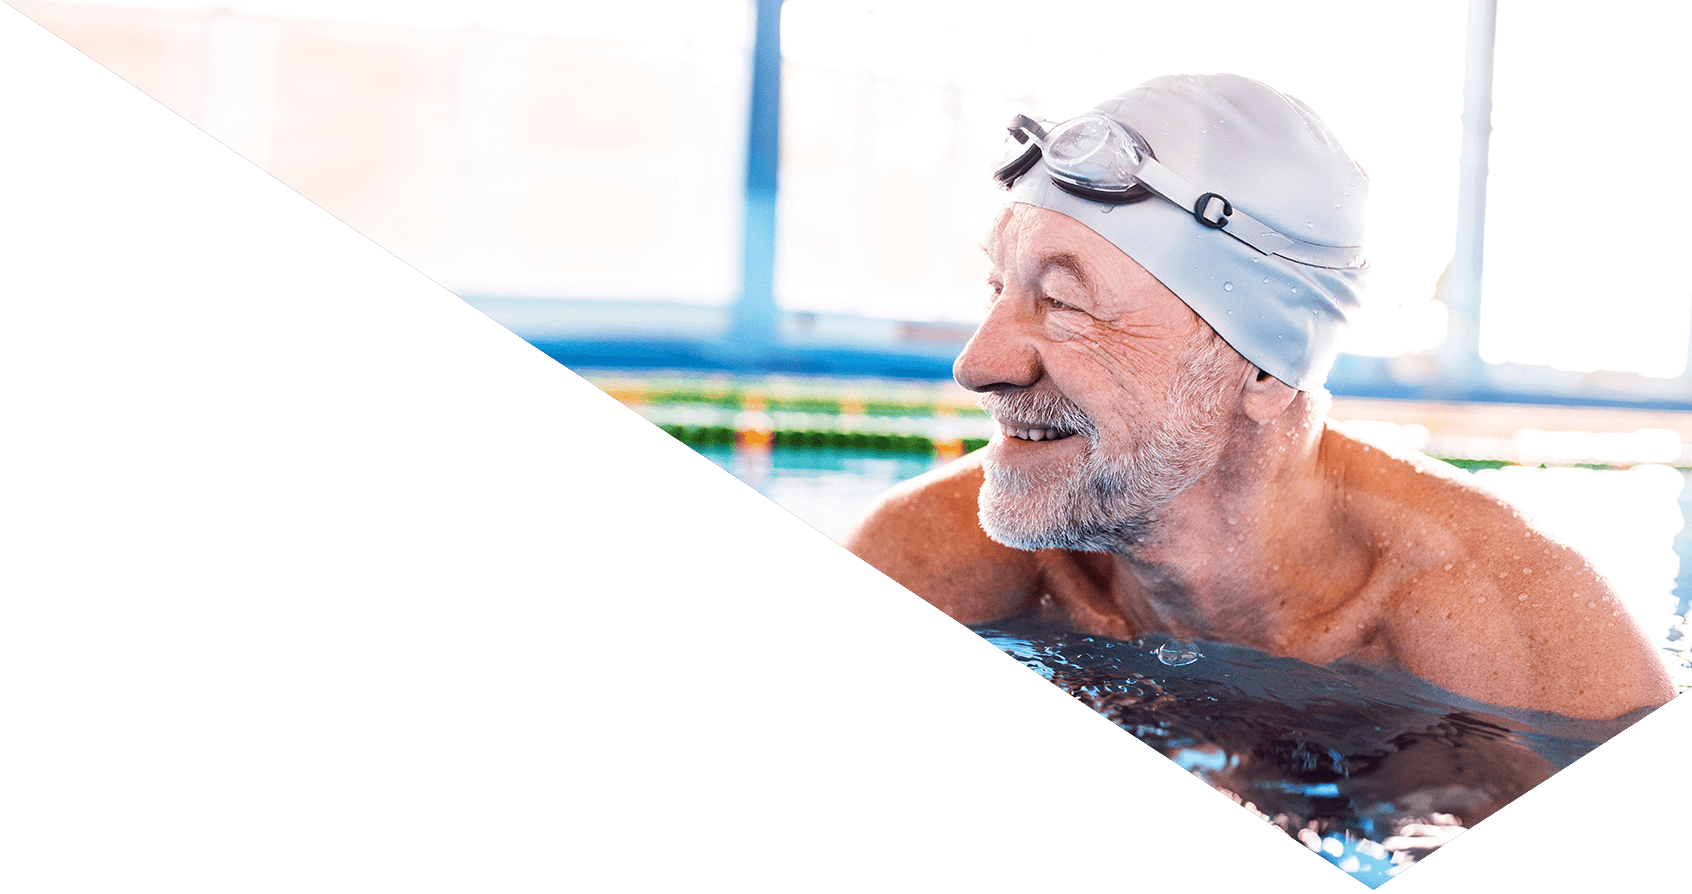 Image showing an old man swimming